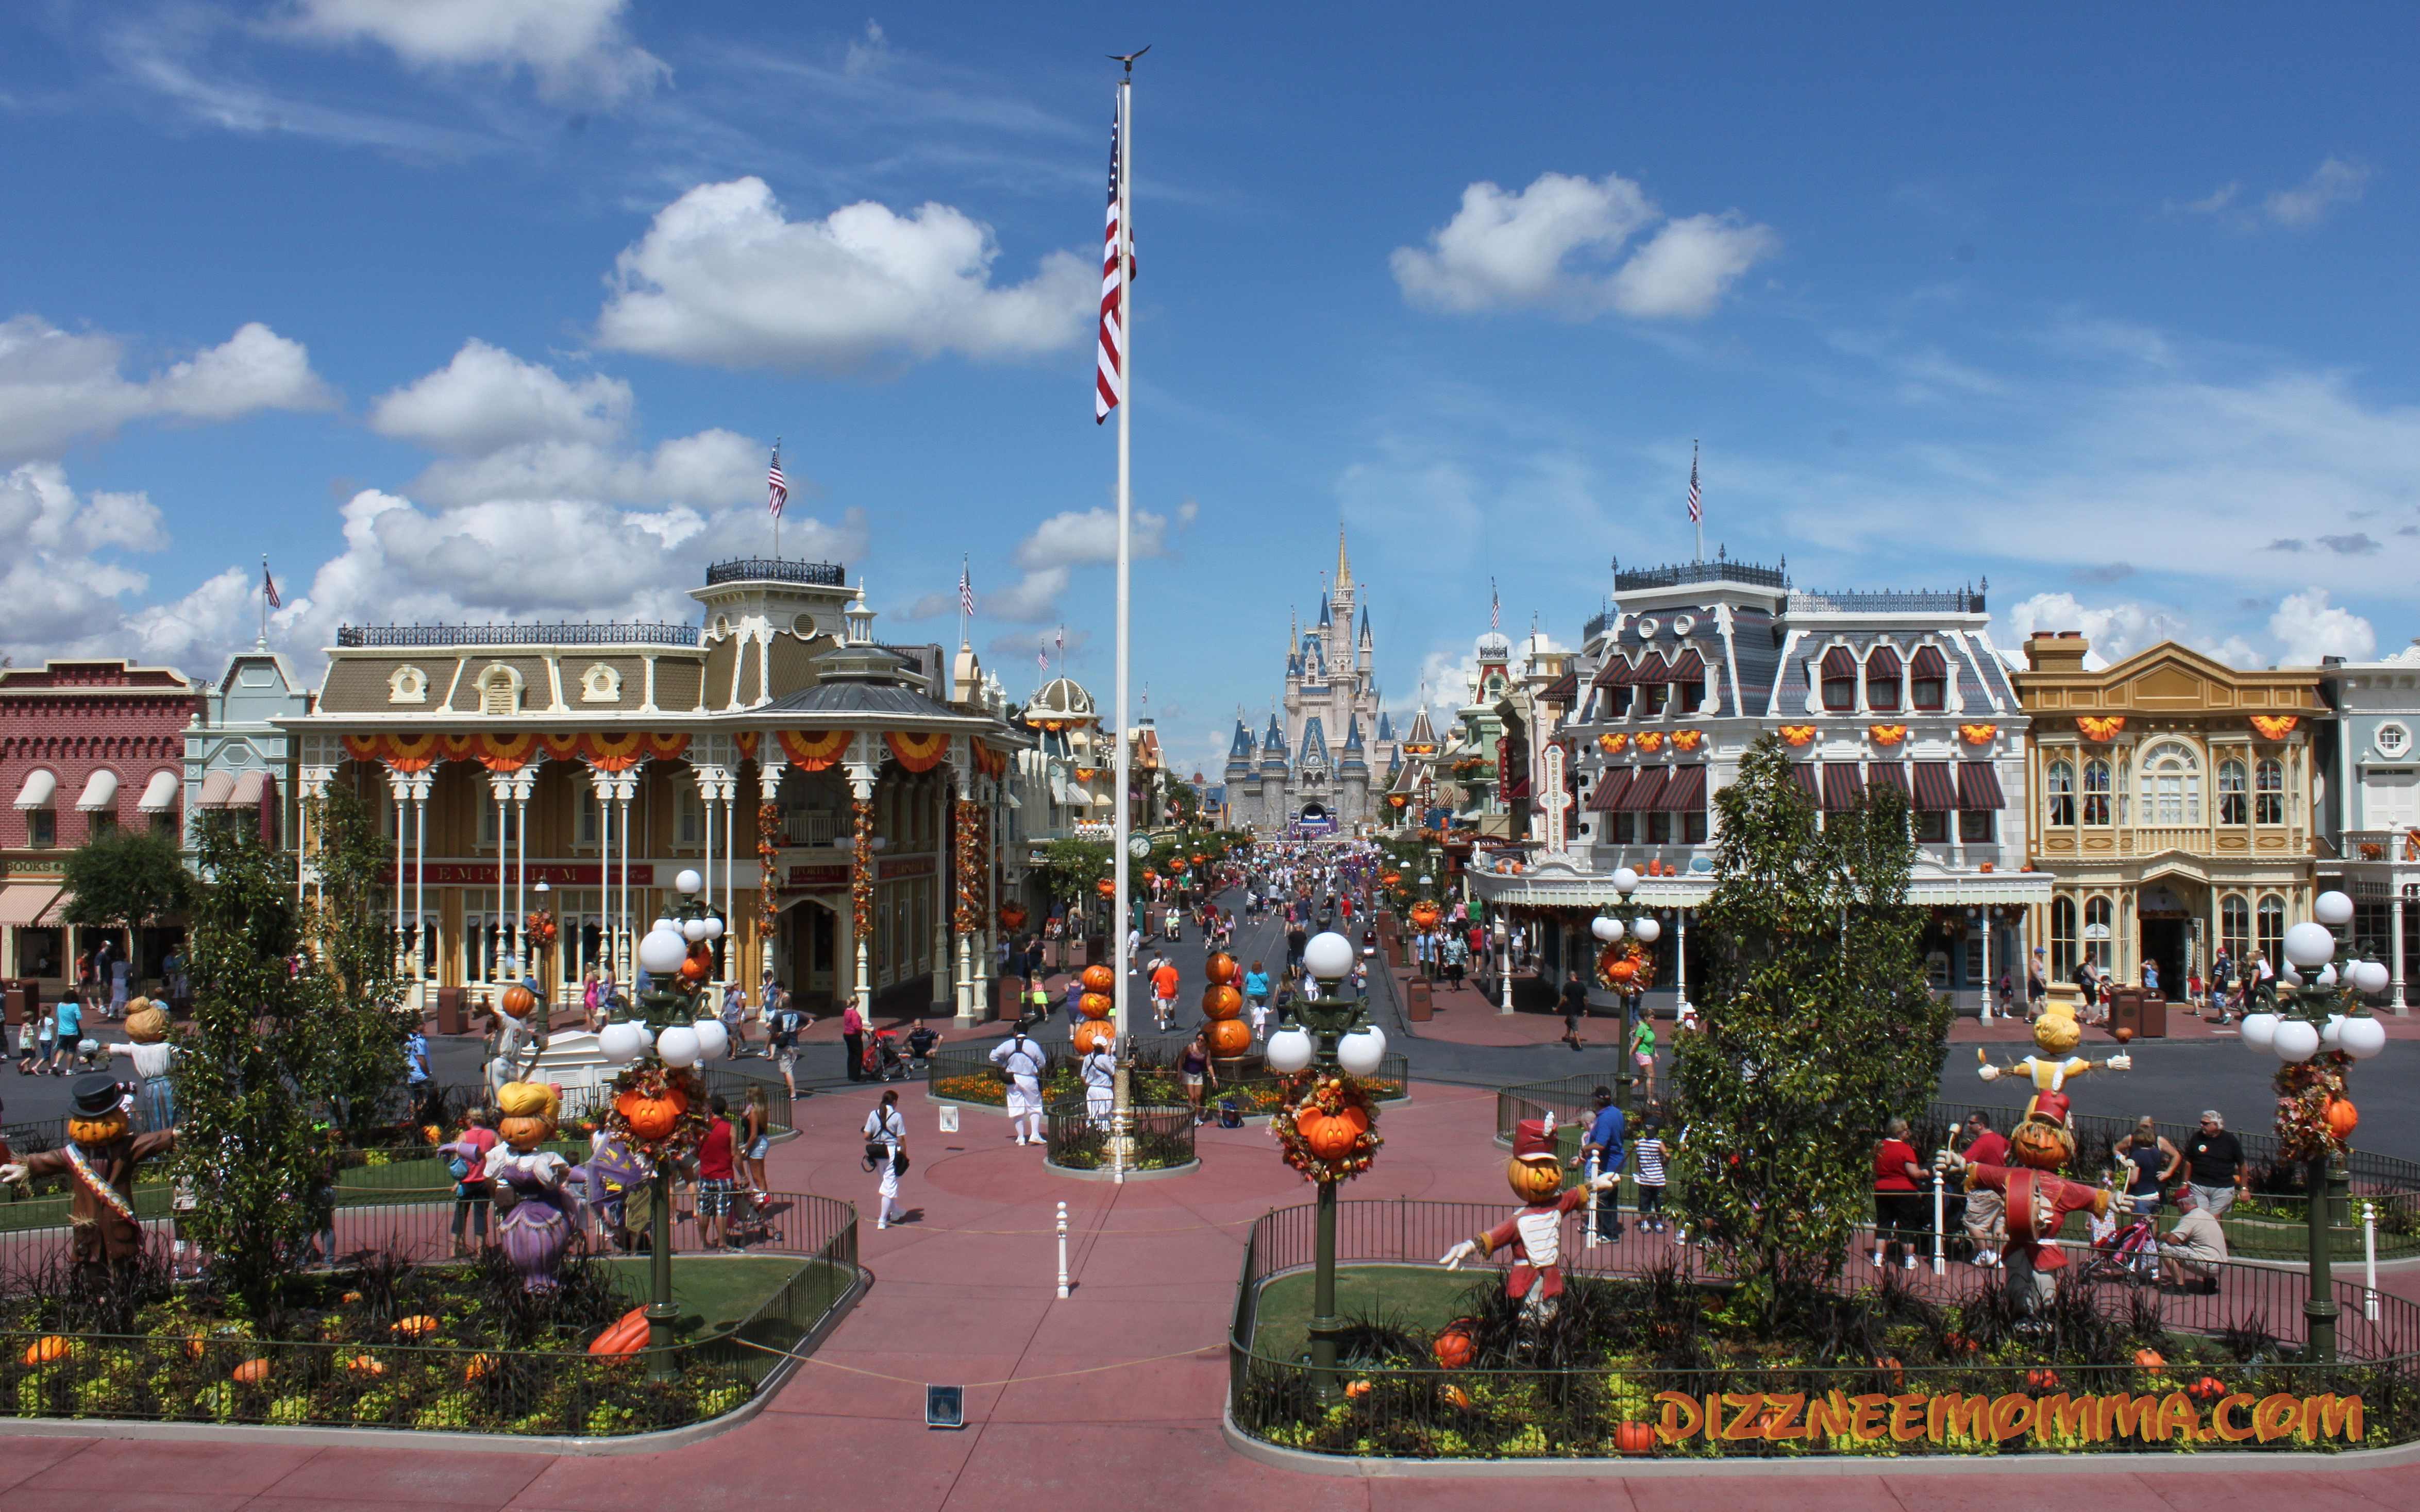 Main street and Tomorrowland are set in two very special years. Main Street is set in 1910, and Tomorrowland is set in 1986. These years are the years of Haleys comet.